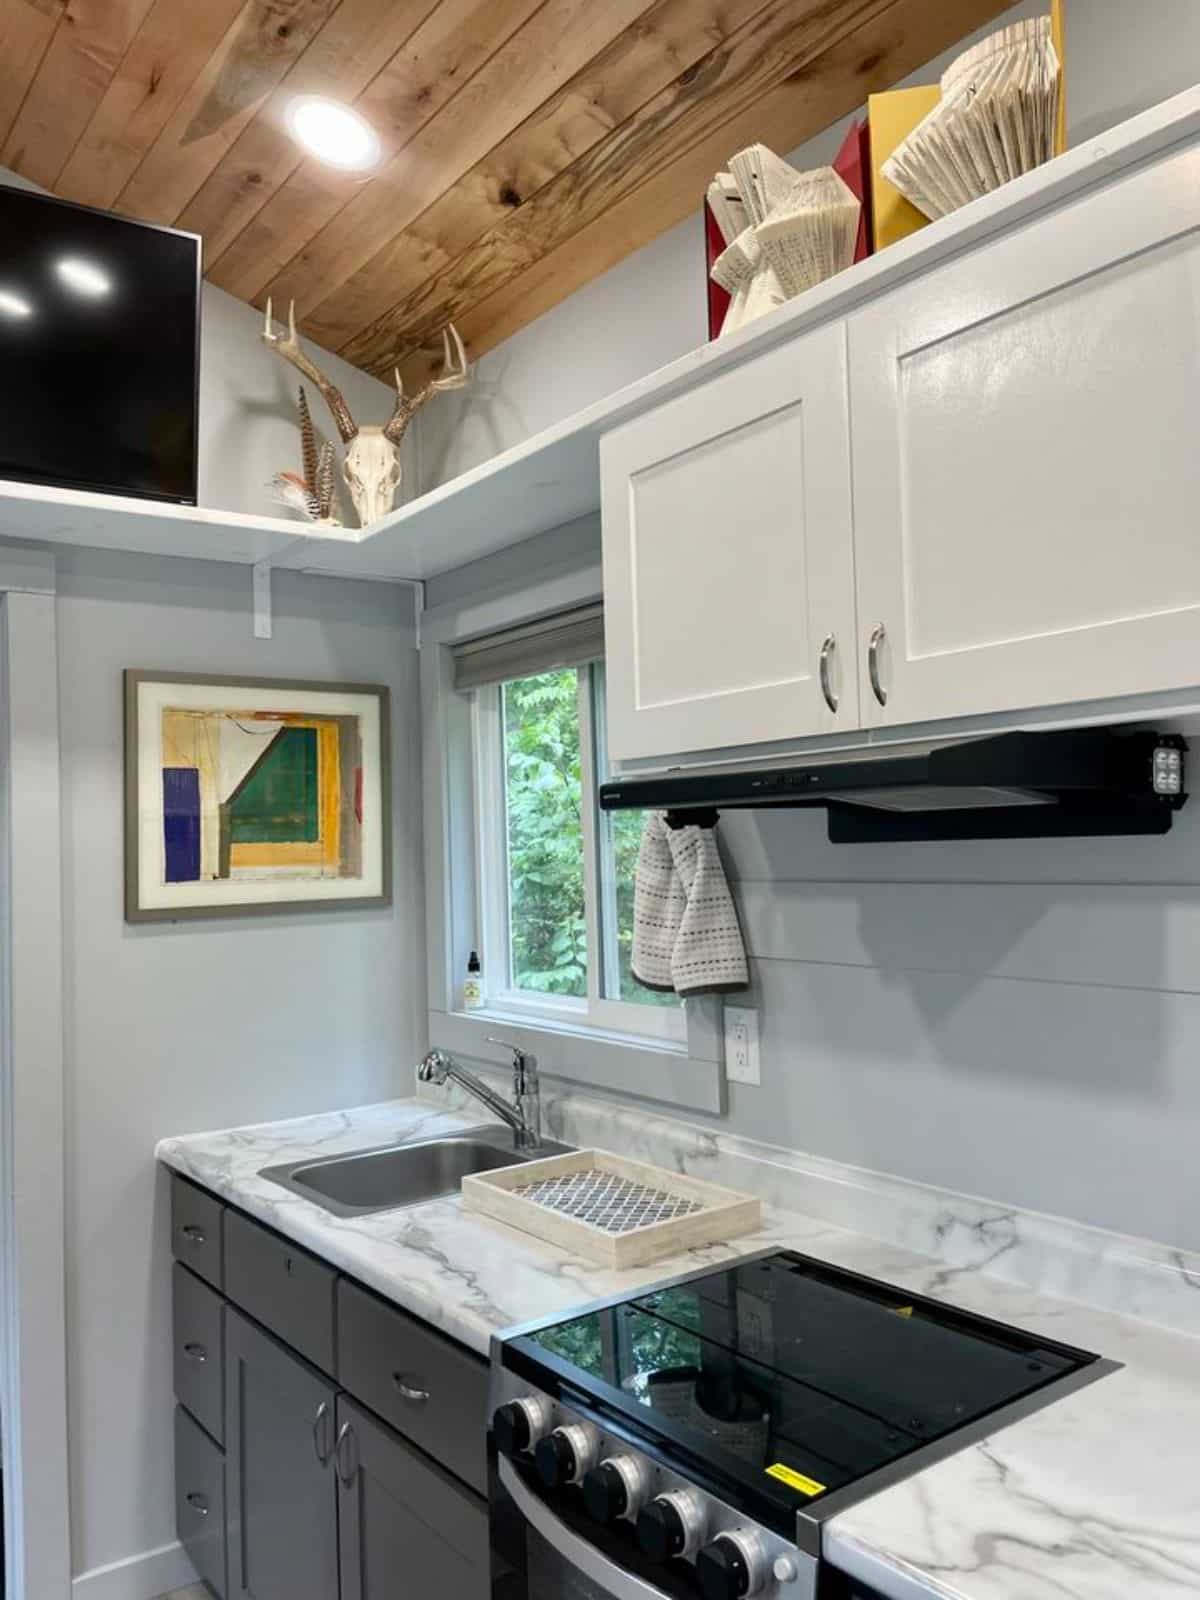 shelves and storage cabinets above the kitchen countertop of high end tiny home